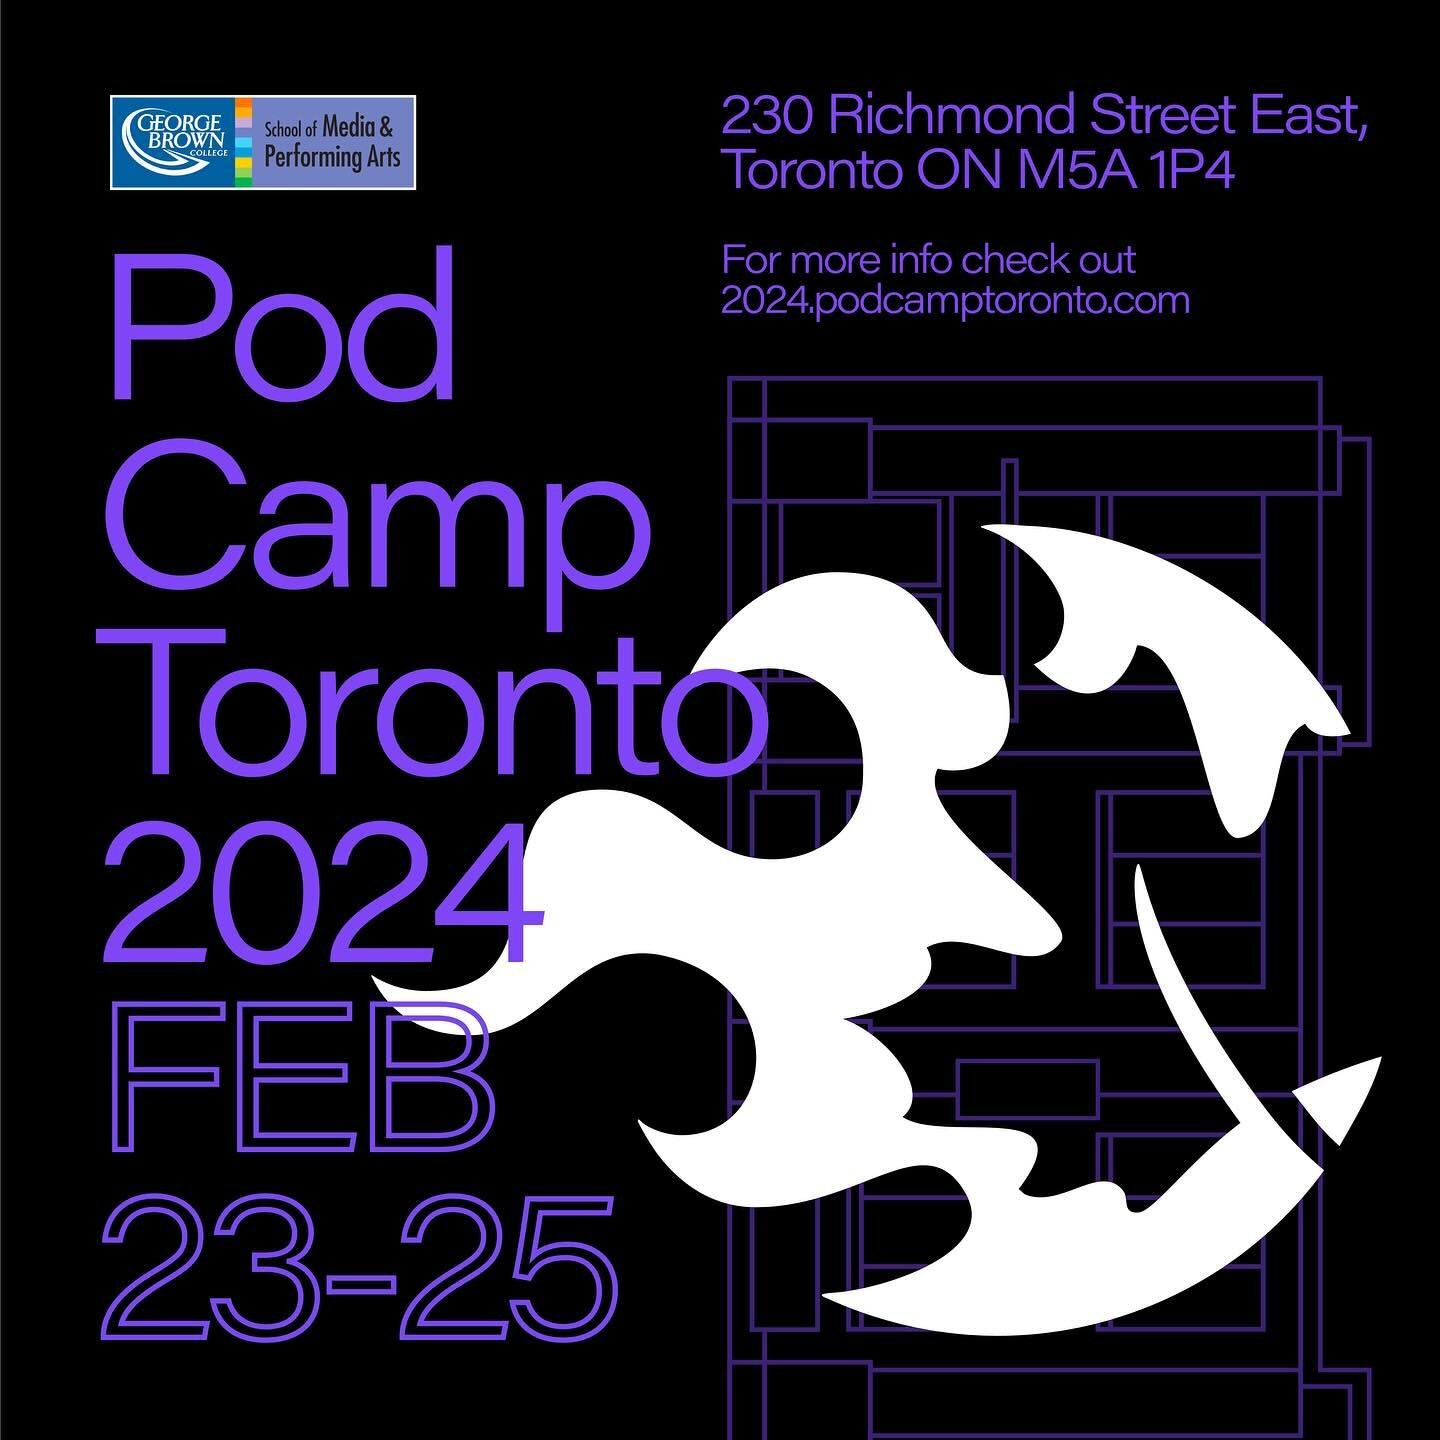 📆&nbsp;SAVE THE DATE: FEBRUARY 23RD TO 25TH

GBC School of Media is partnering with PodCamp Toronto to host their &ldquo;UNCONFERENCE&rdquo; event &mdash; a two-day gathering and knowledge trading for digital media enthusiasts of all kinds.

PodCamp